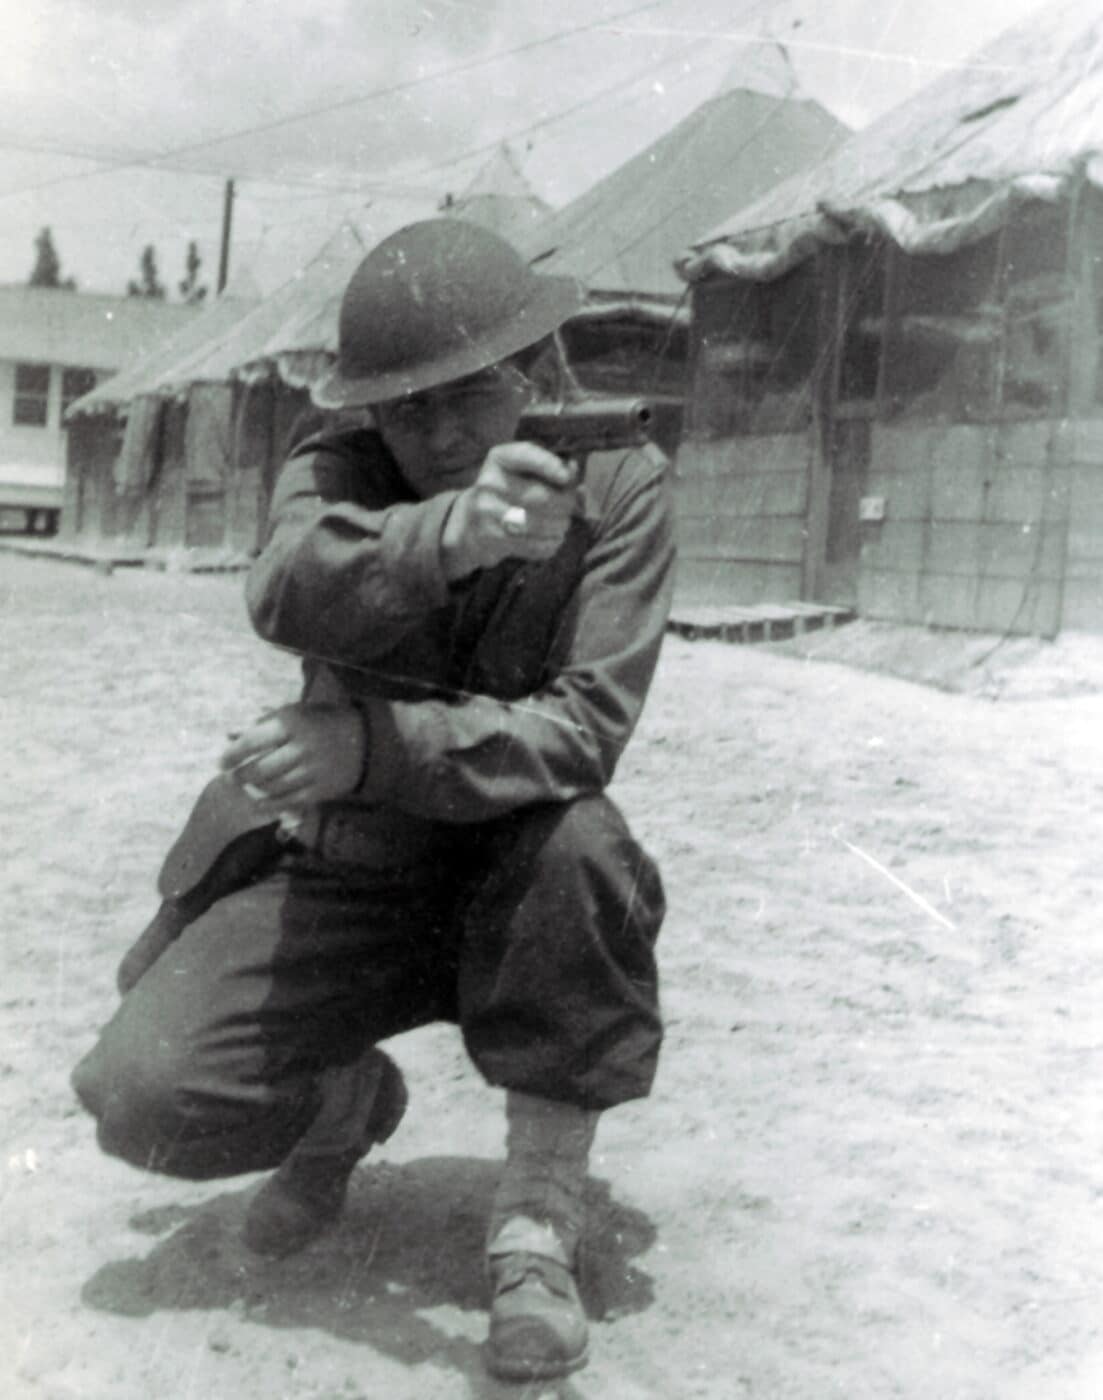 Solider posing with 1911 pistol